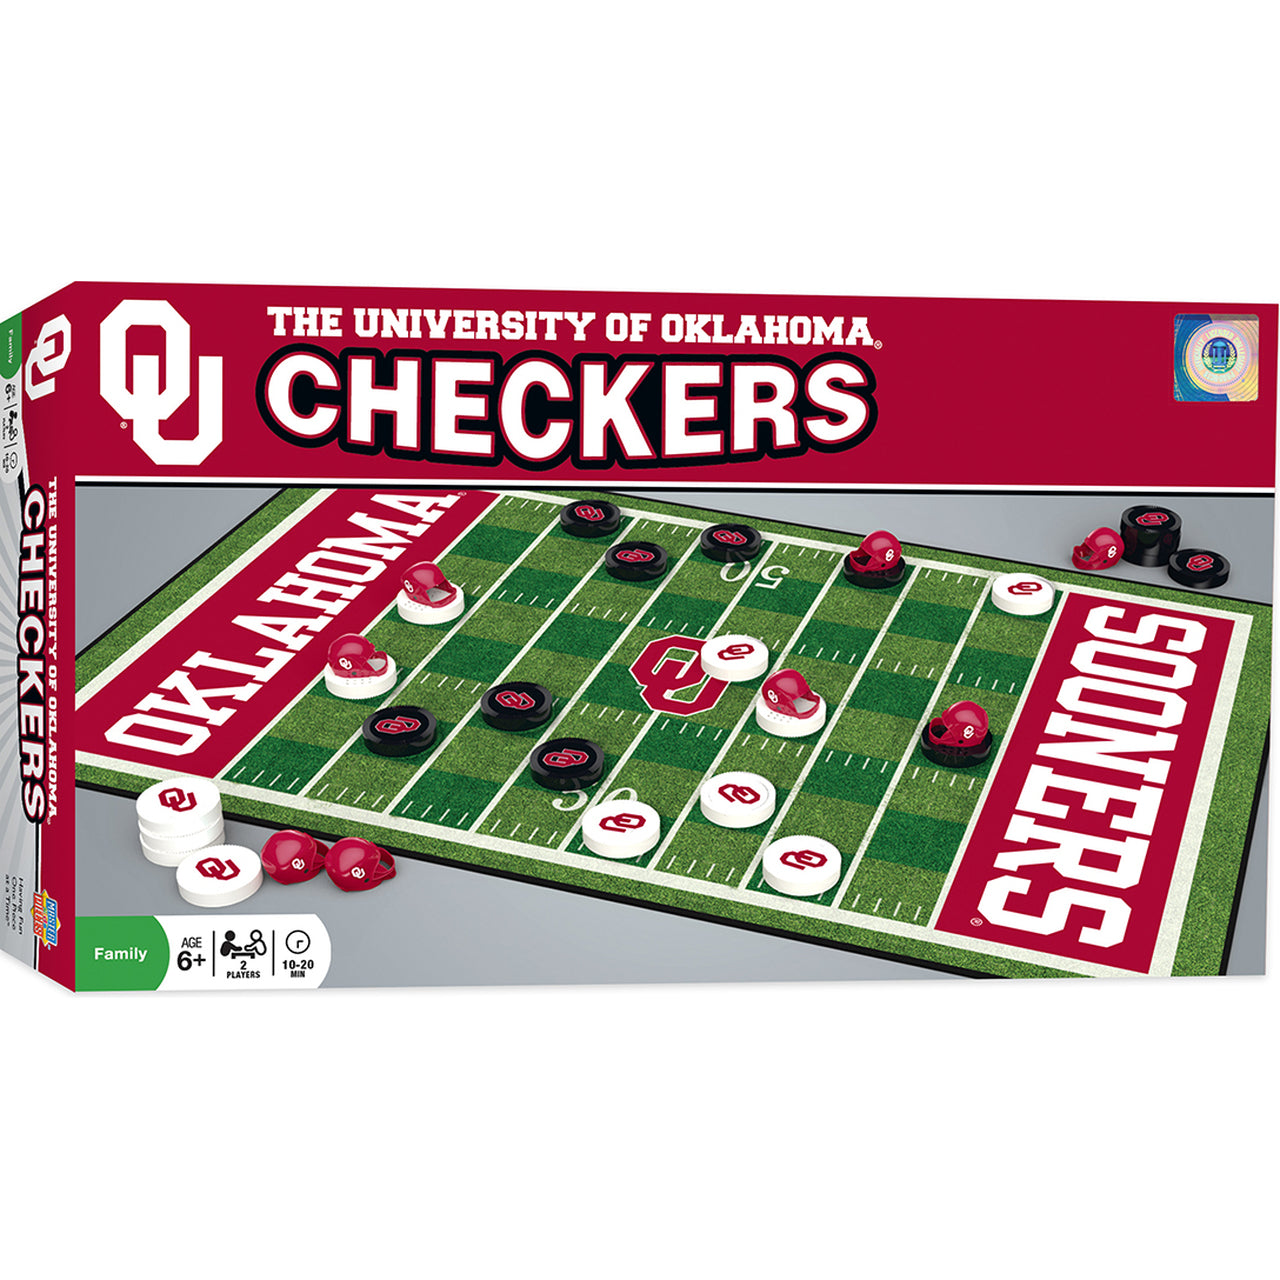 Oklahoma Sooners Checkers Board Game by Masterpieces